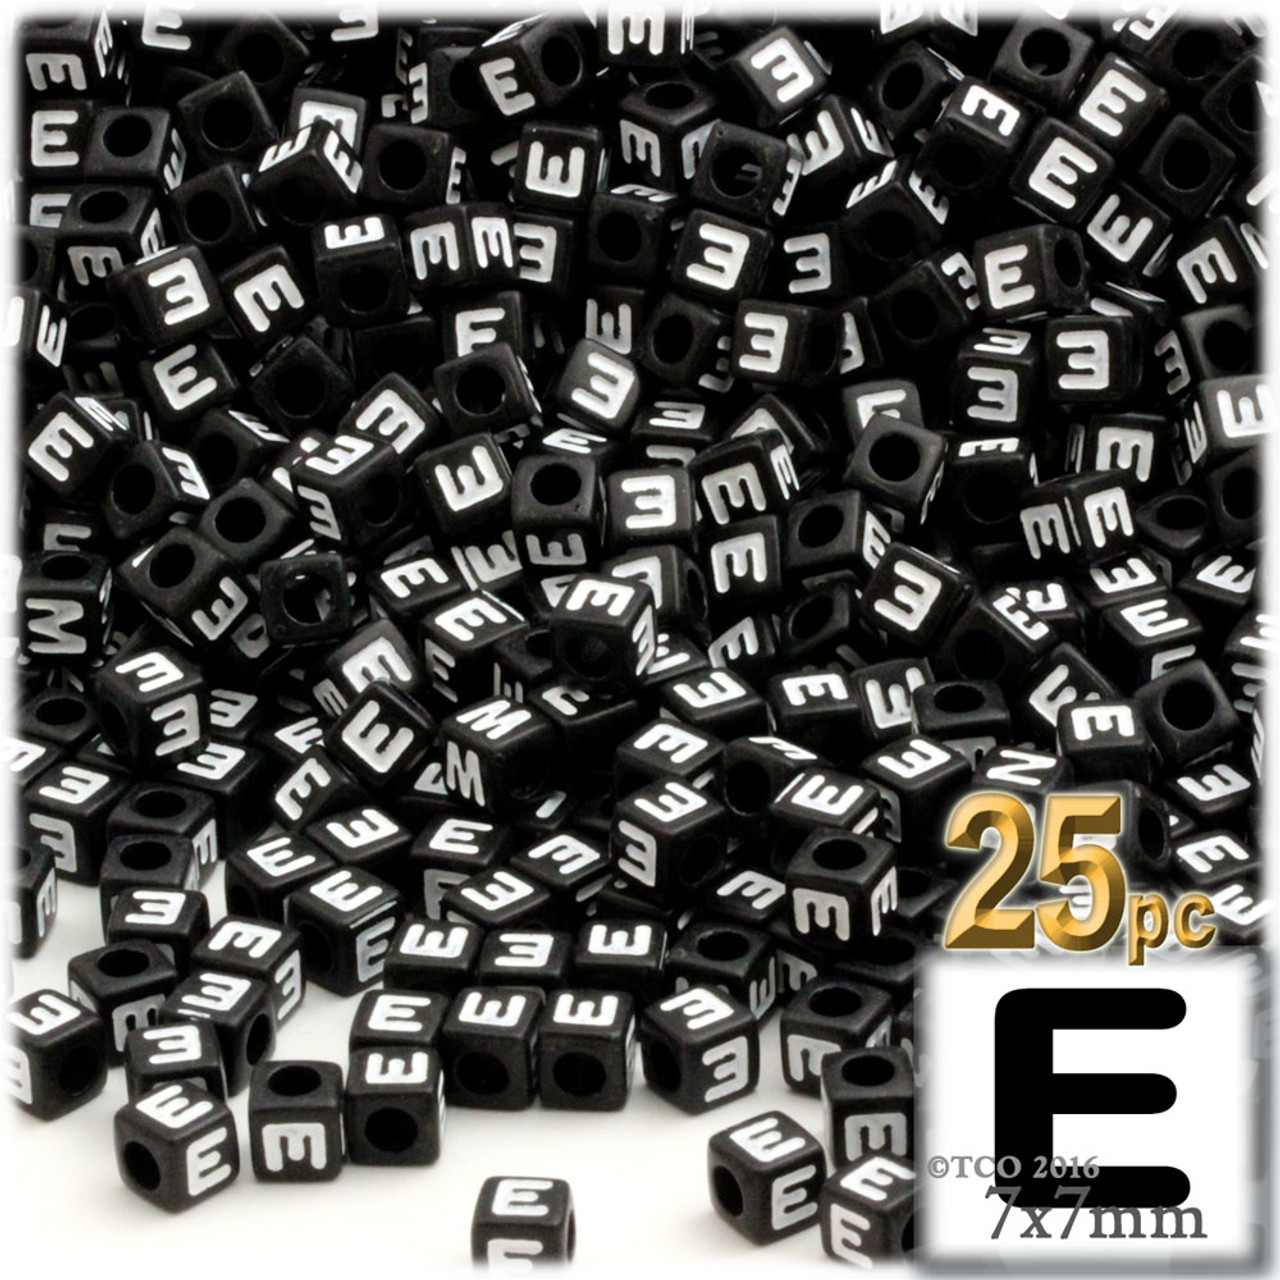 Letter Beads - 7mm Small Cube Square White Alphabet Acrylic or Resin Beads  - 300 pc set